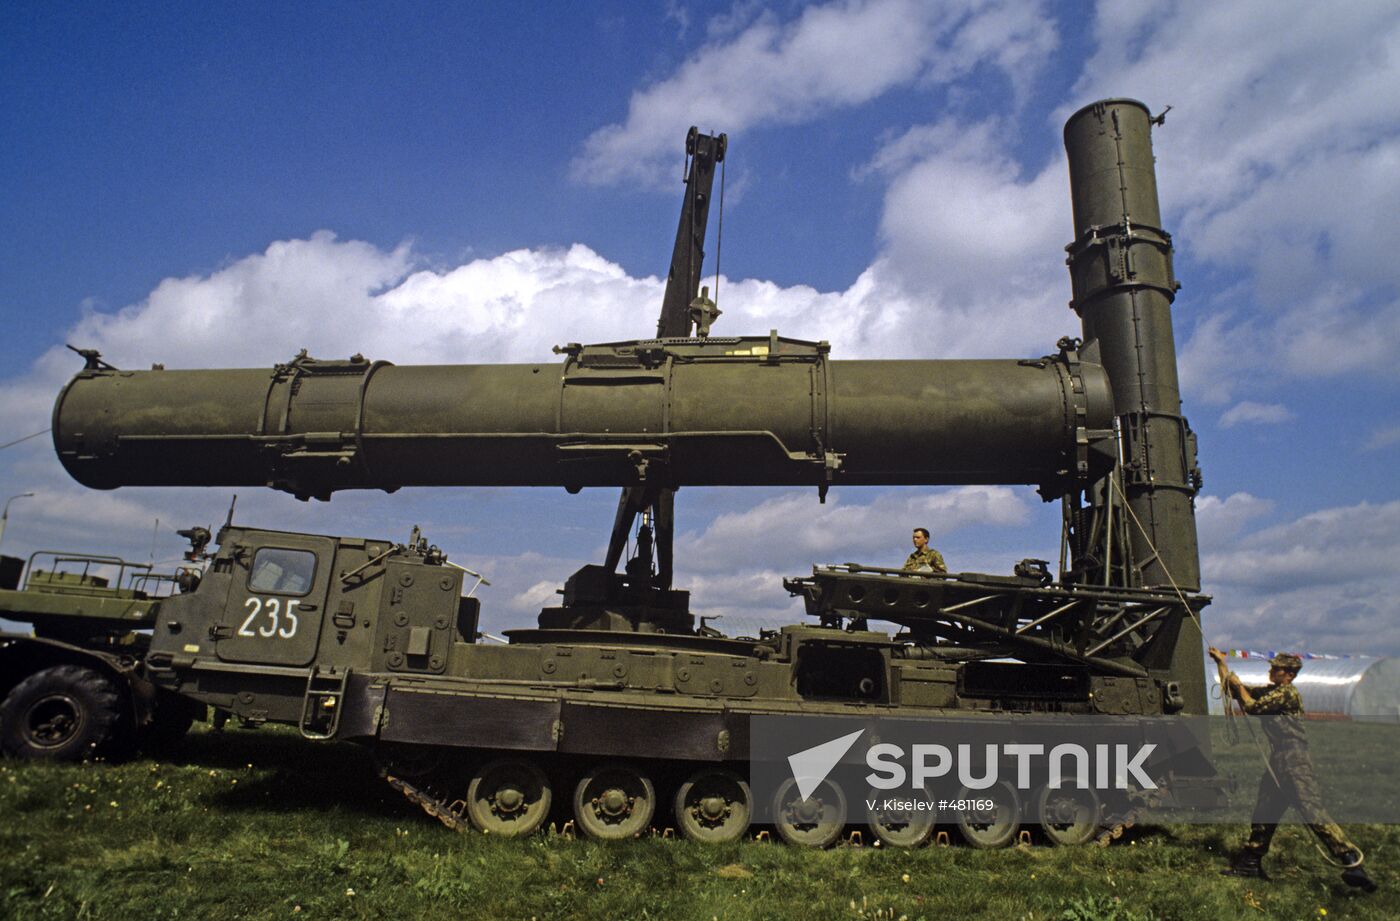 S-300V surface-to-air missile system